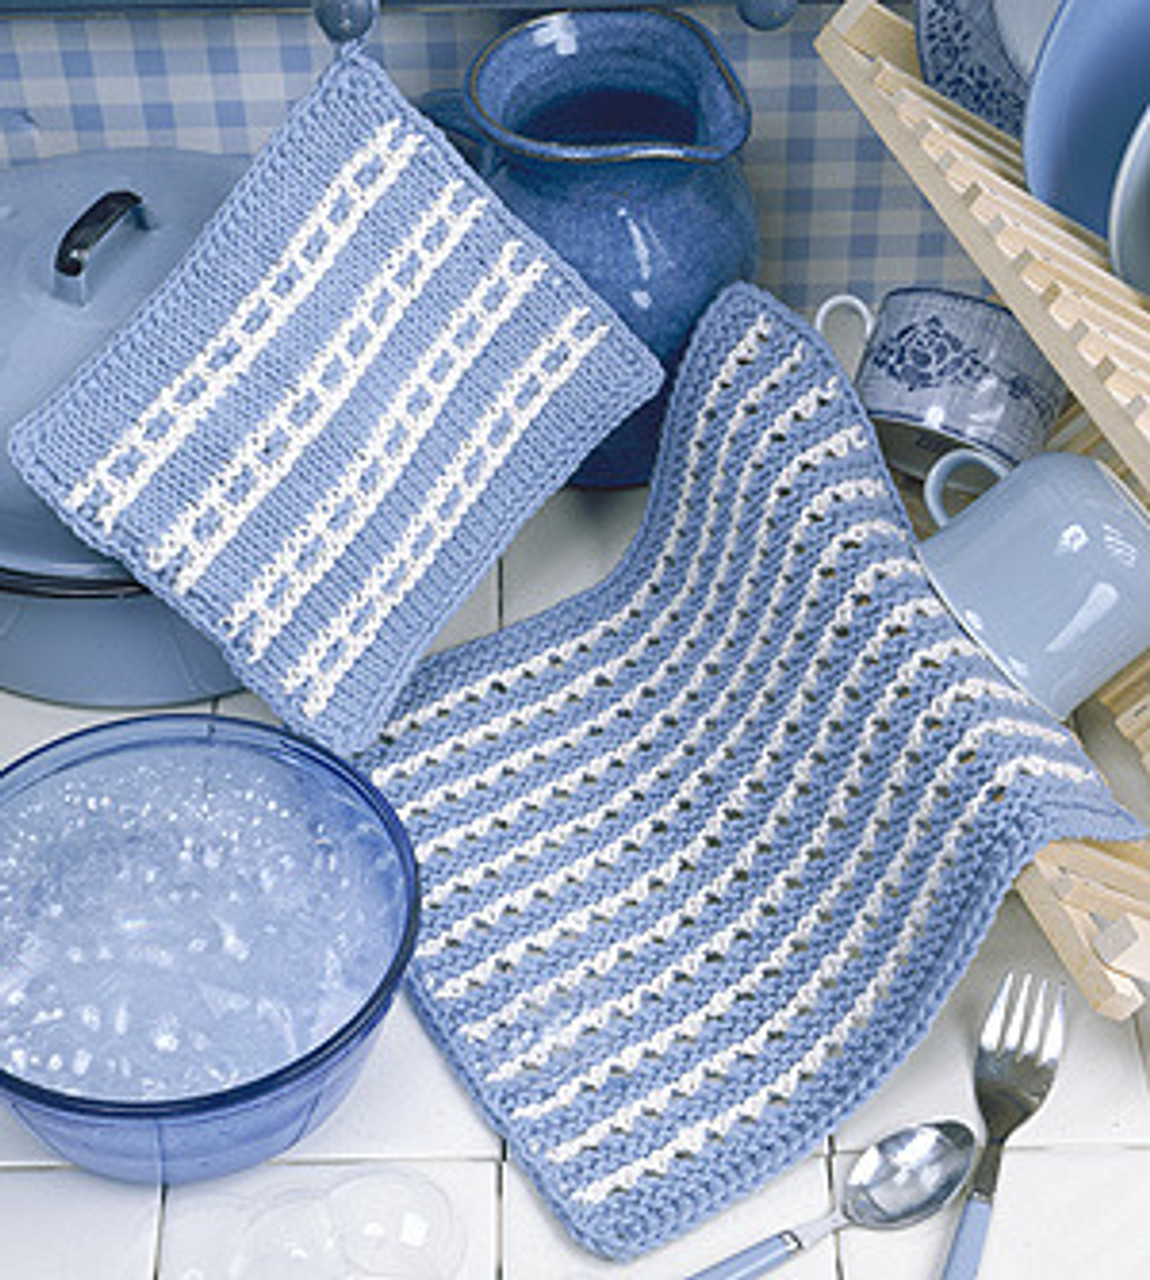 Blue Pot Holder with Pocket and Cotton Tea Towel